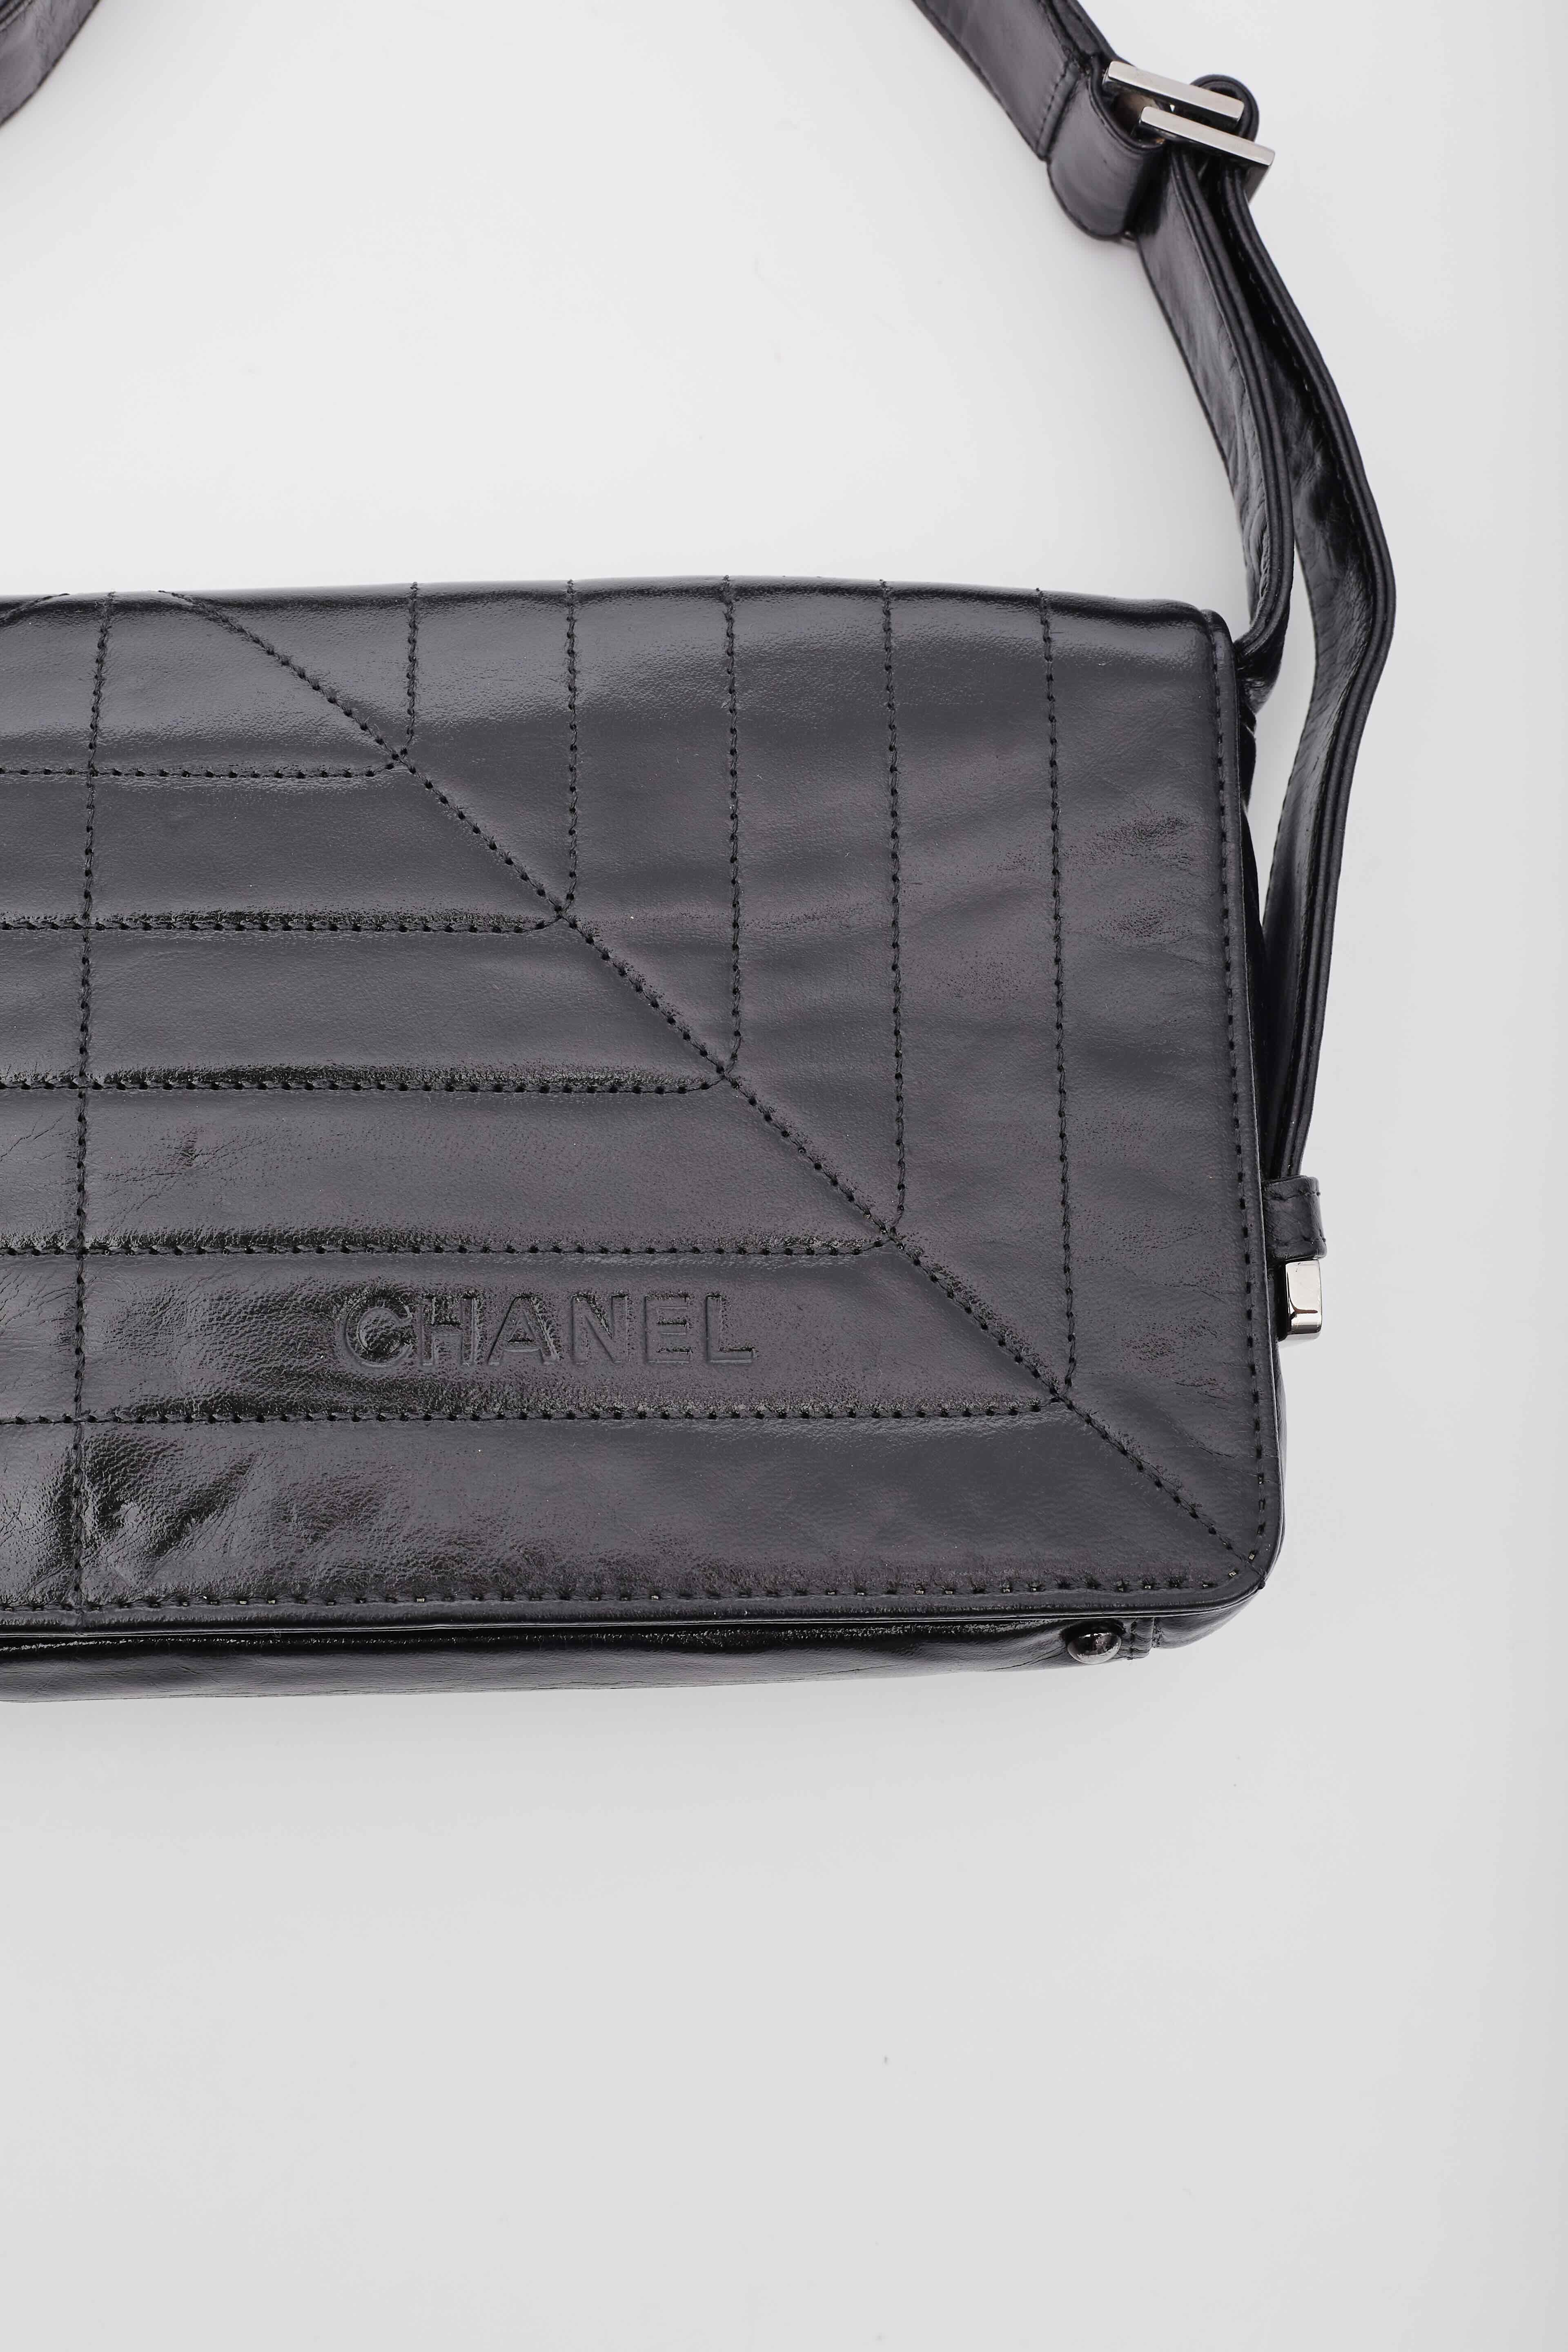 Chanel Vintage Black Lambskin Horizontal Quilted Flap Bag For Sale 10